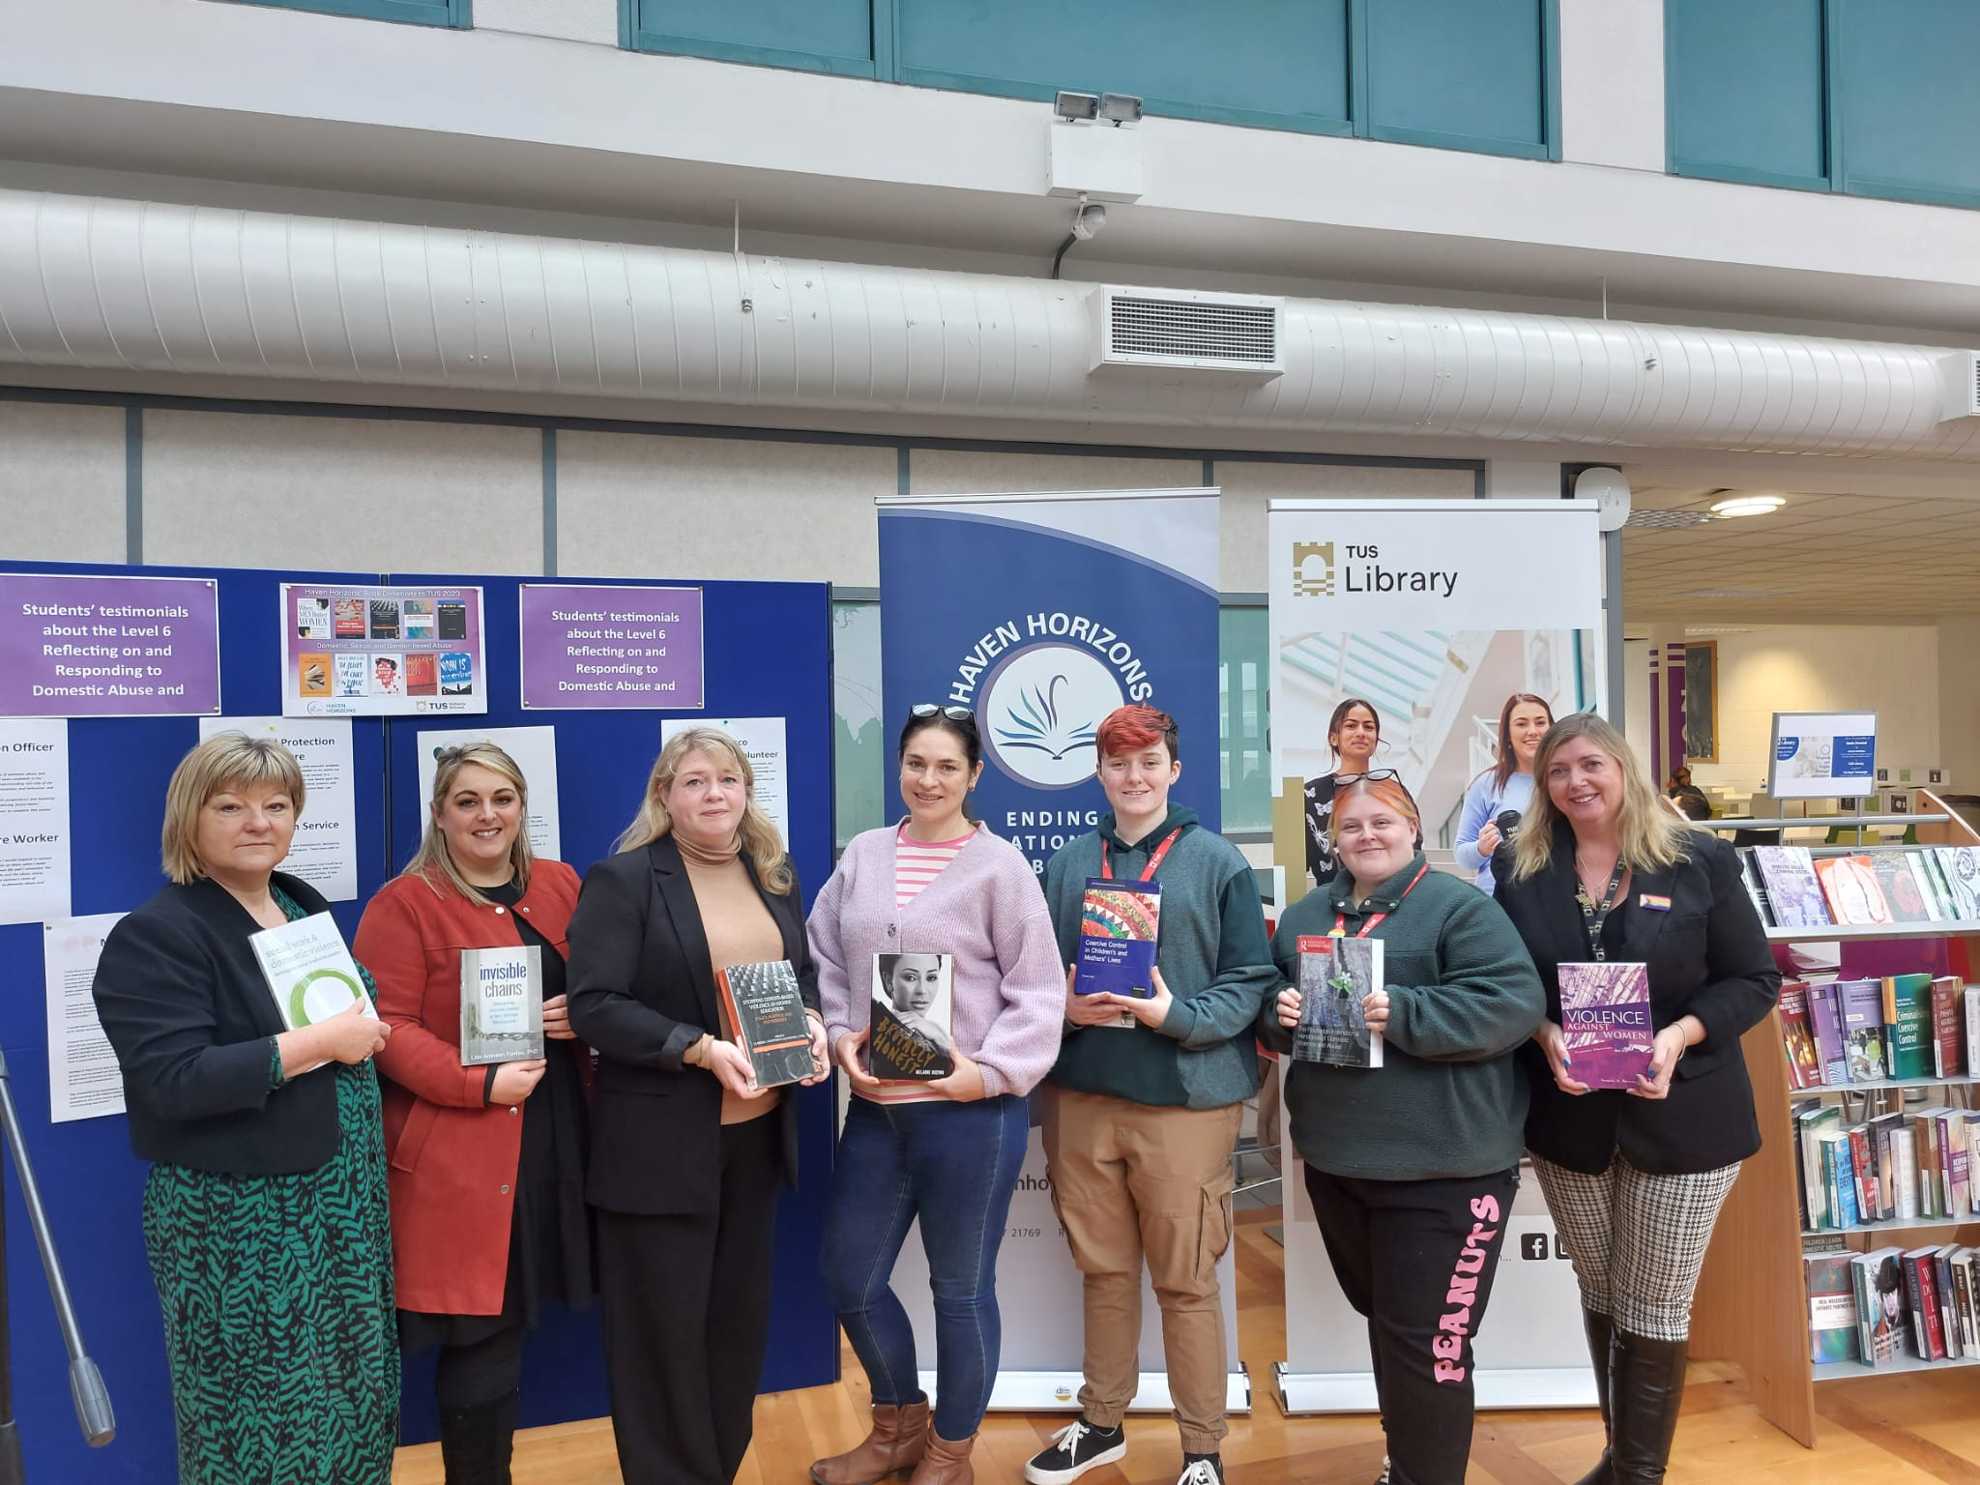 Press Release – Haven Horizons Donates Books on Domestic Abuse to TUS: Midlands (Athlone) Campus Library as part of the ’16 Days’ Campaign